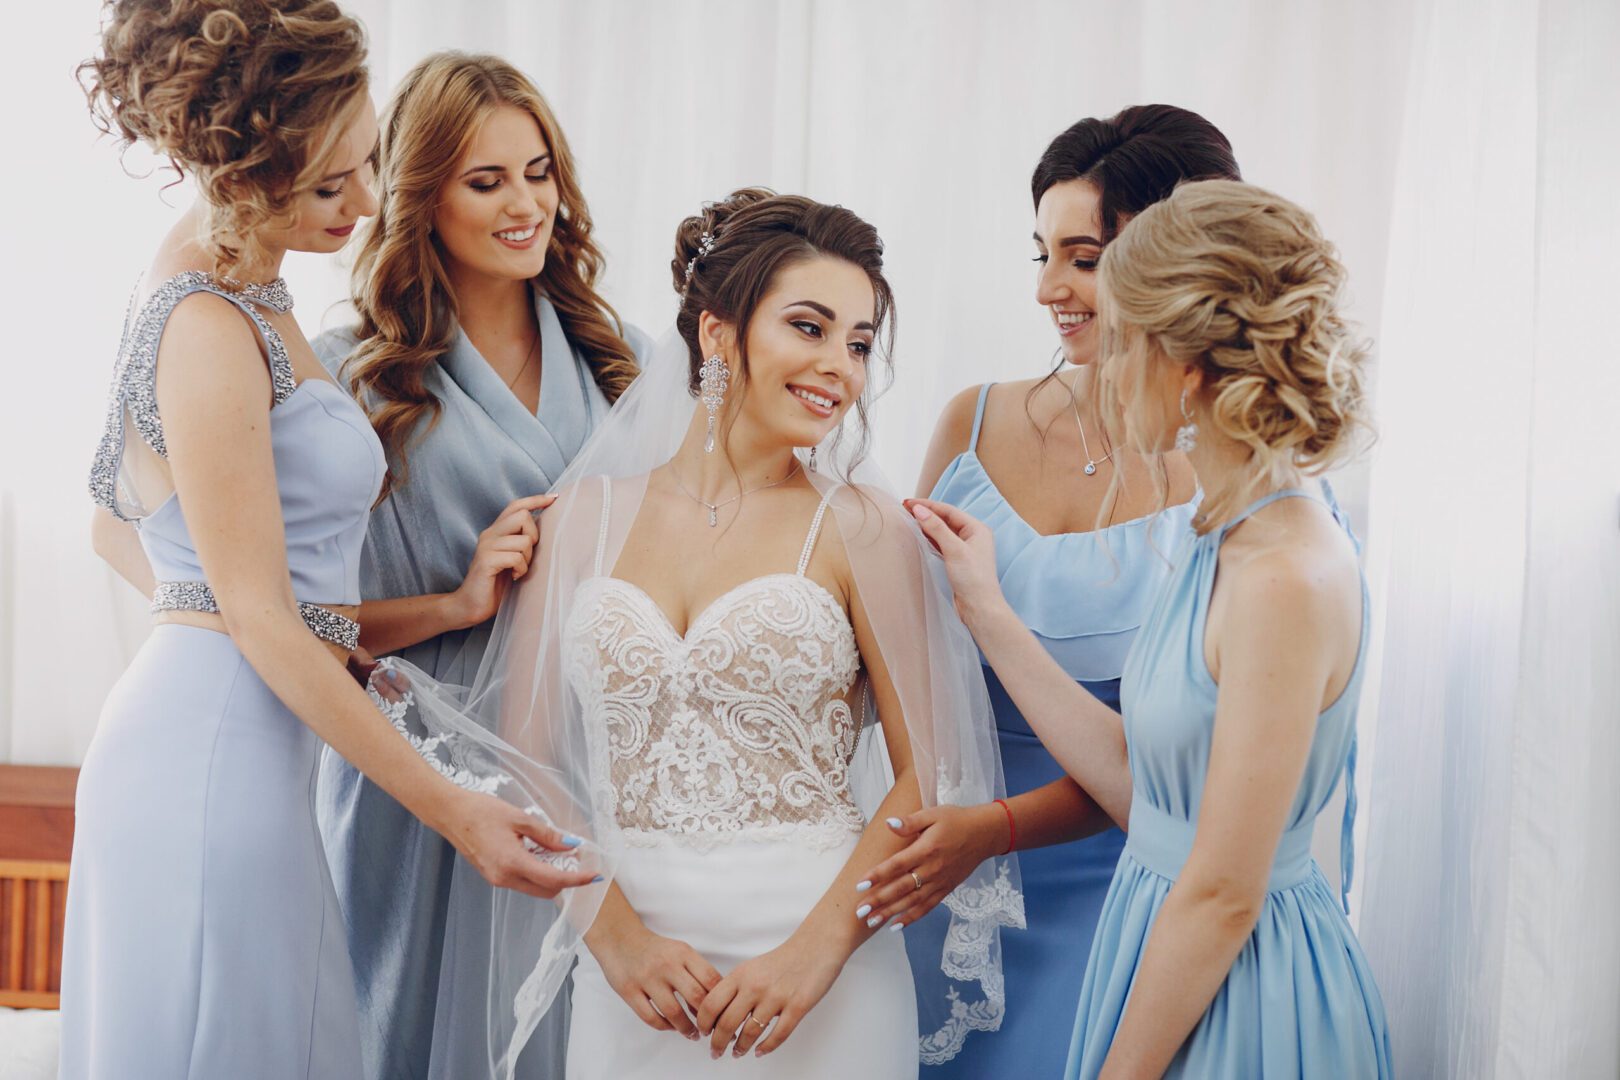 A bride surrounded by bridesmaids